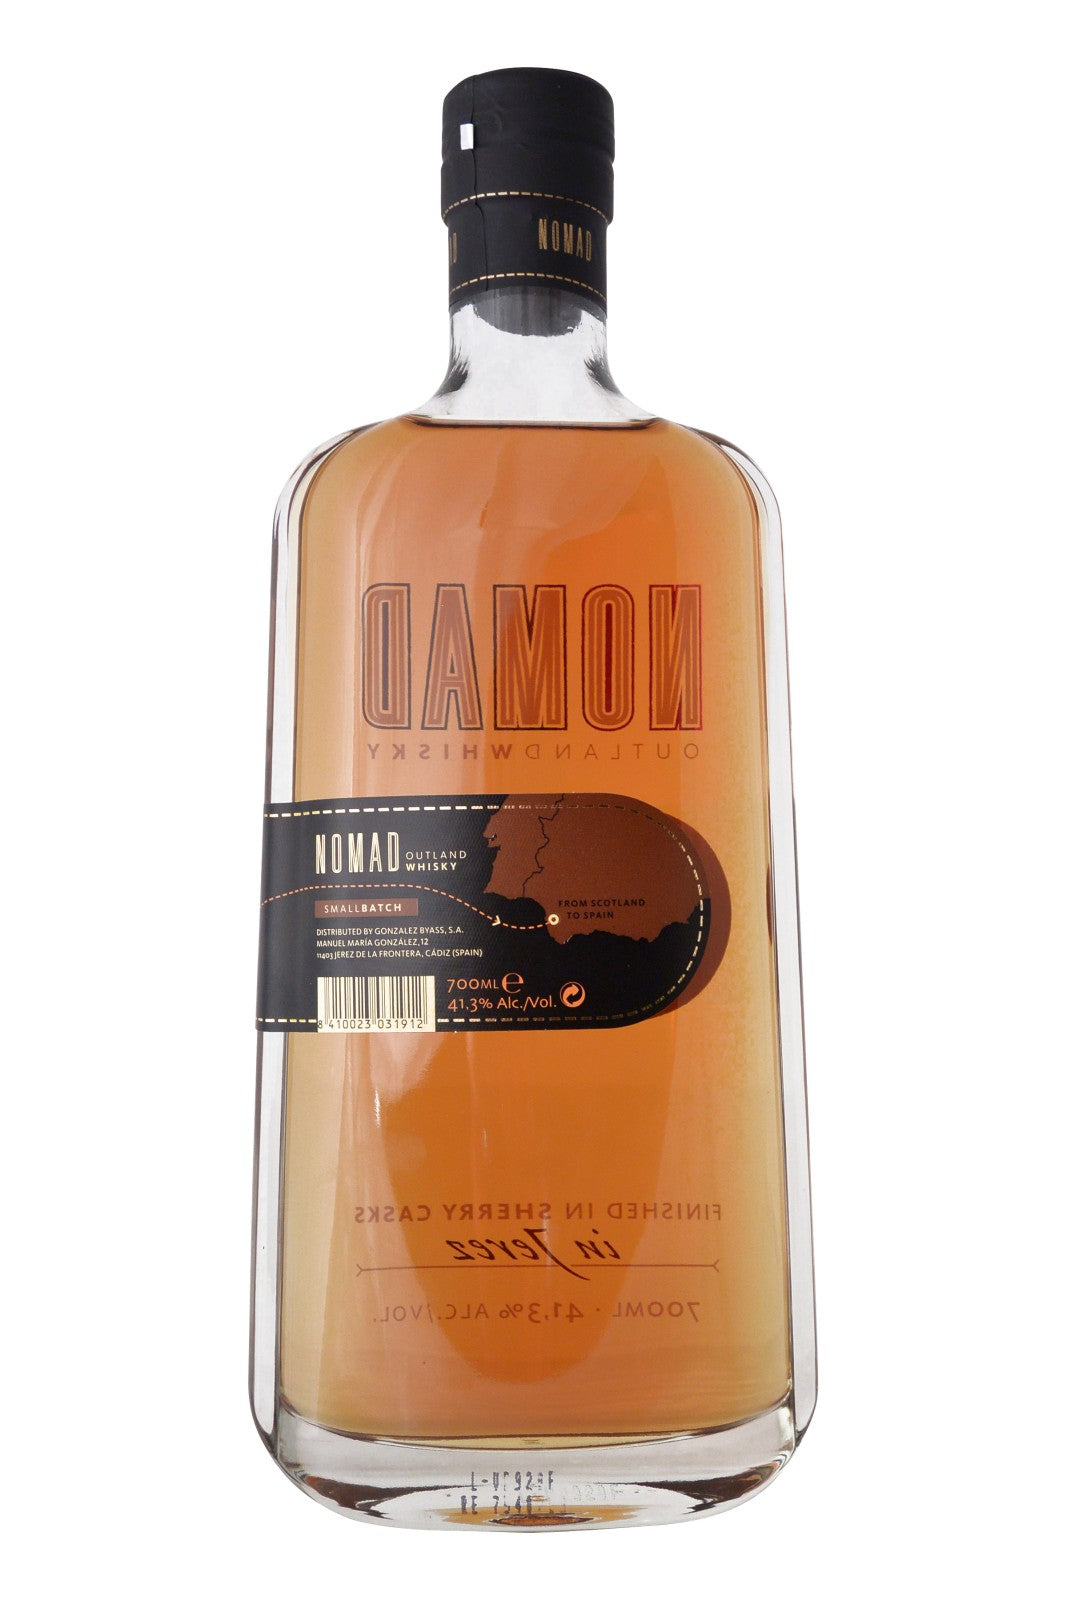 Nomad Outland Whisky Sherry Cask